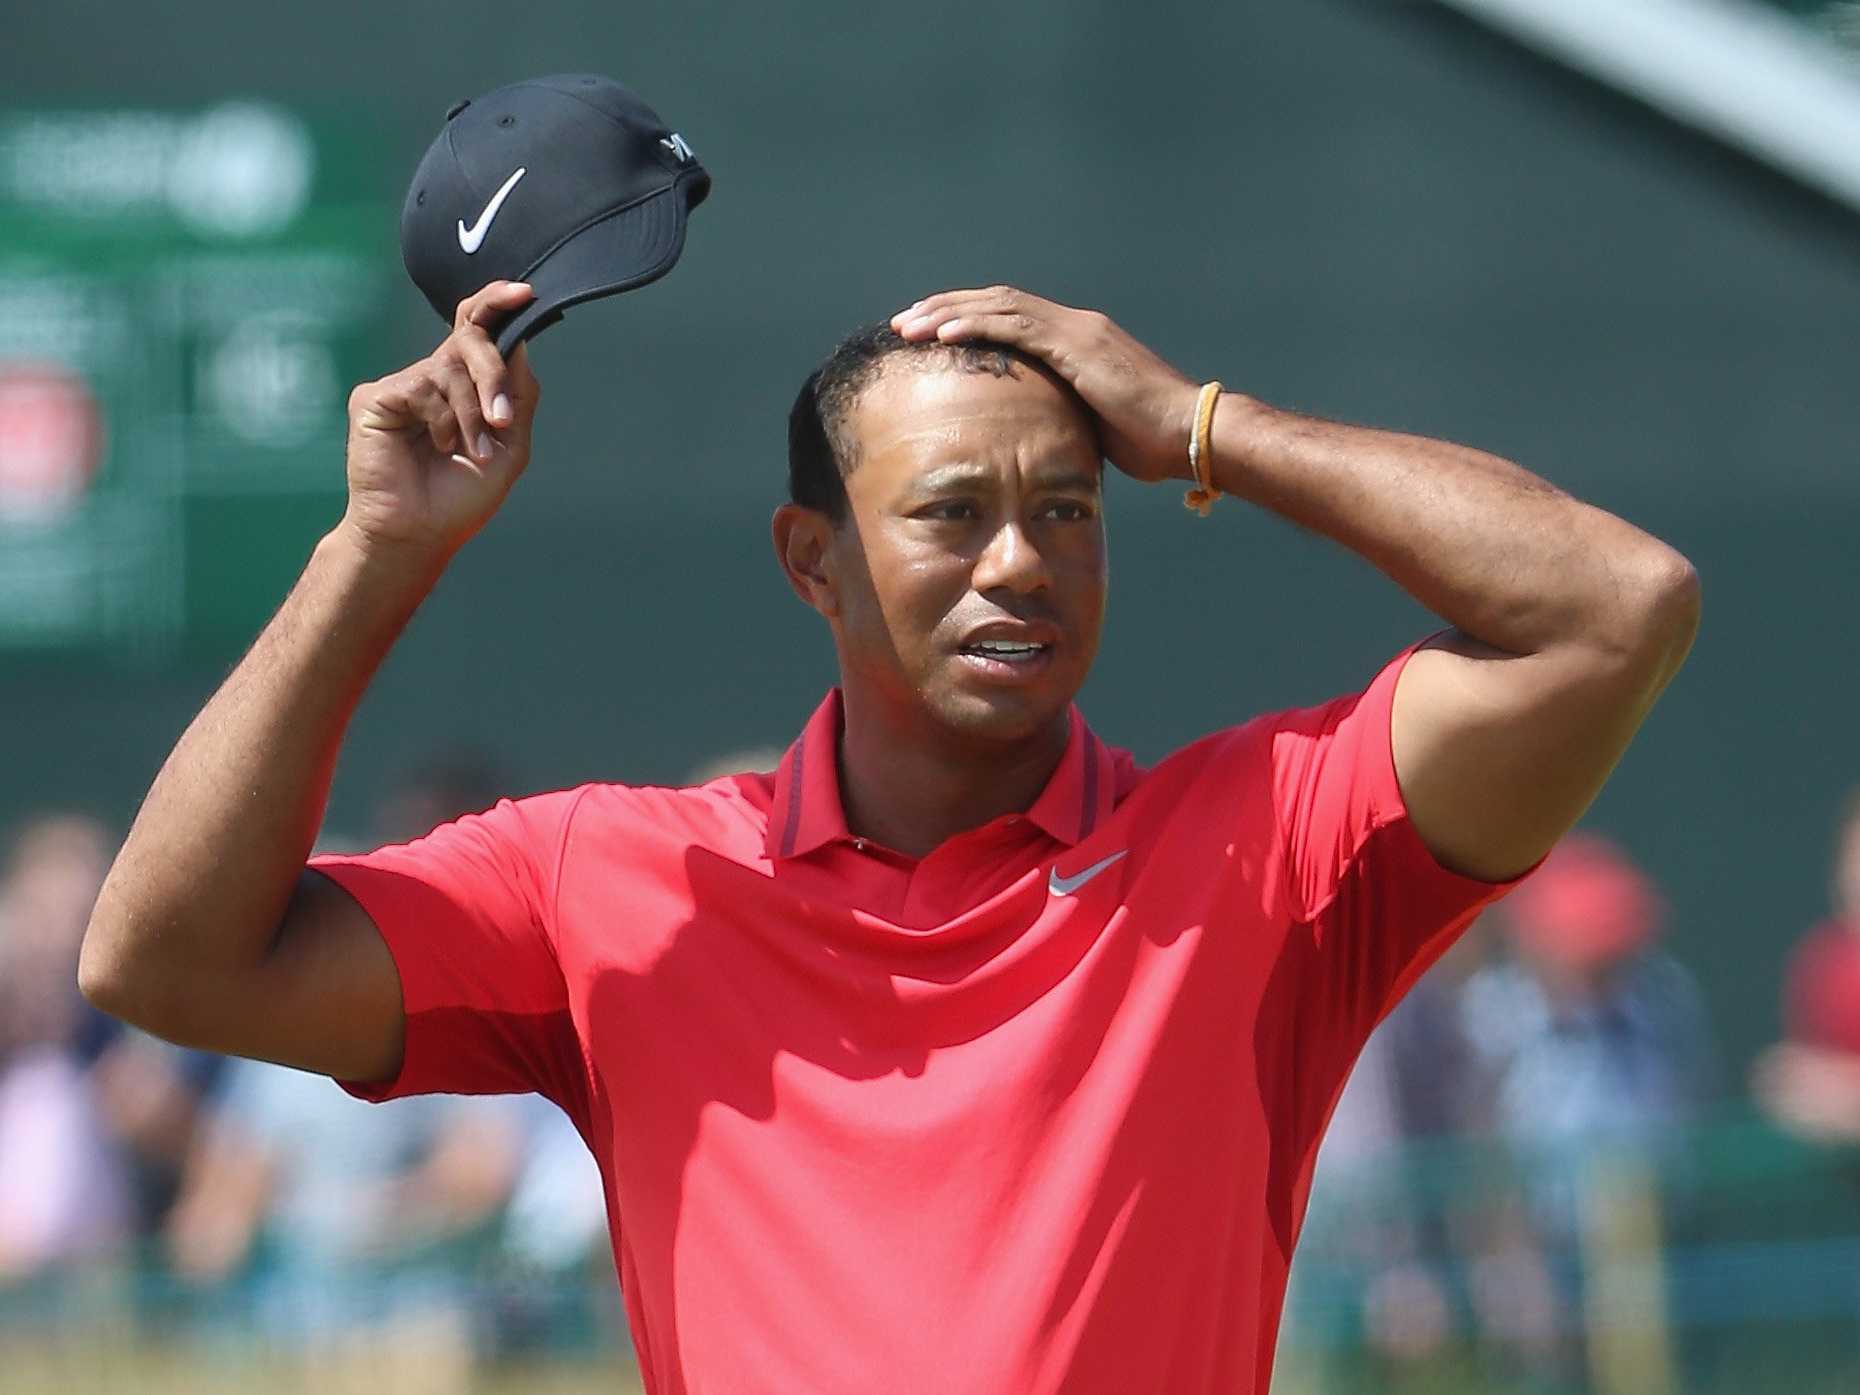 Sports | The Fall of Tiger